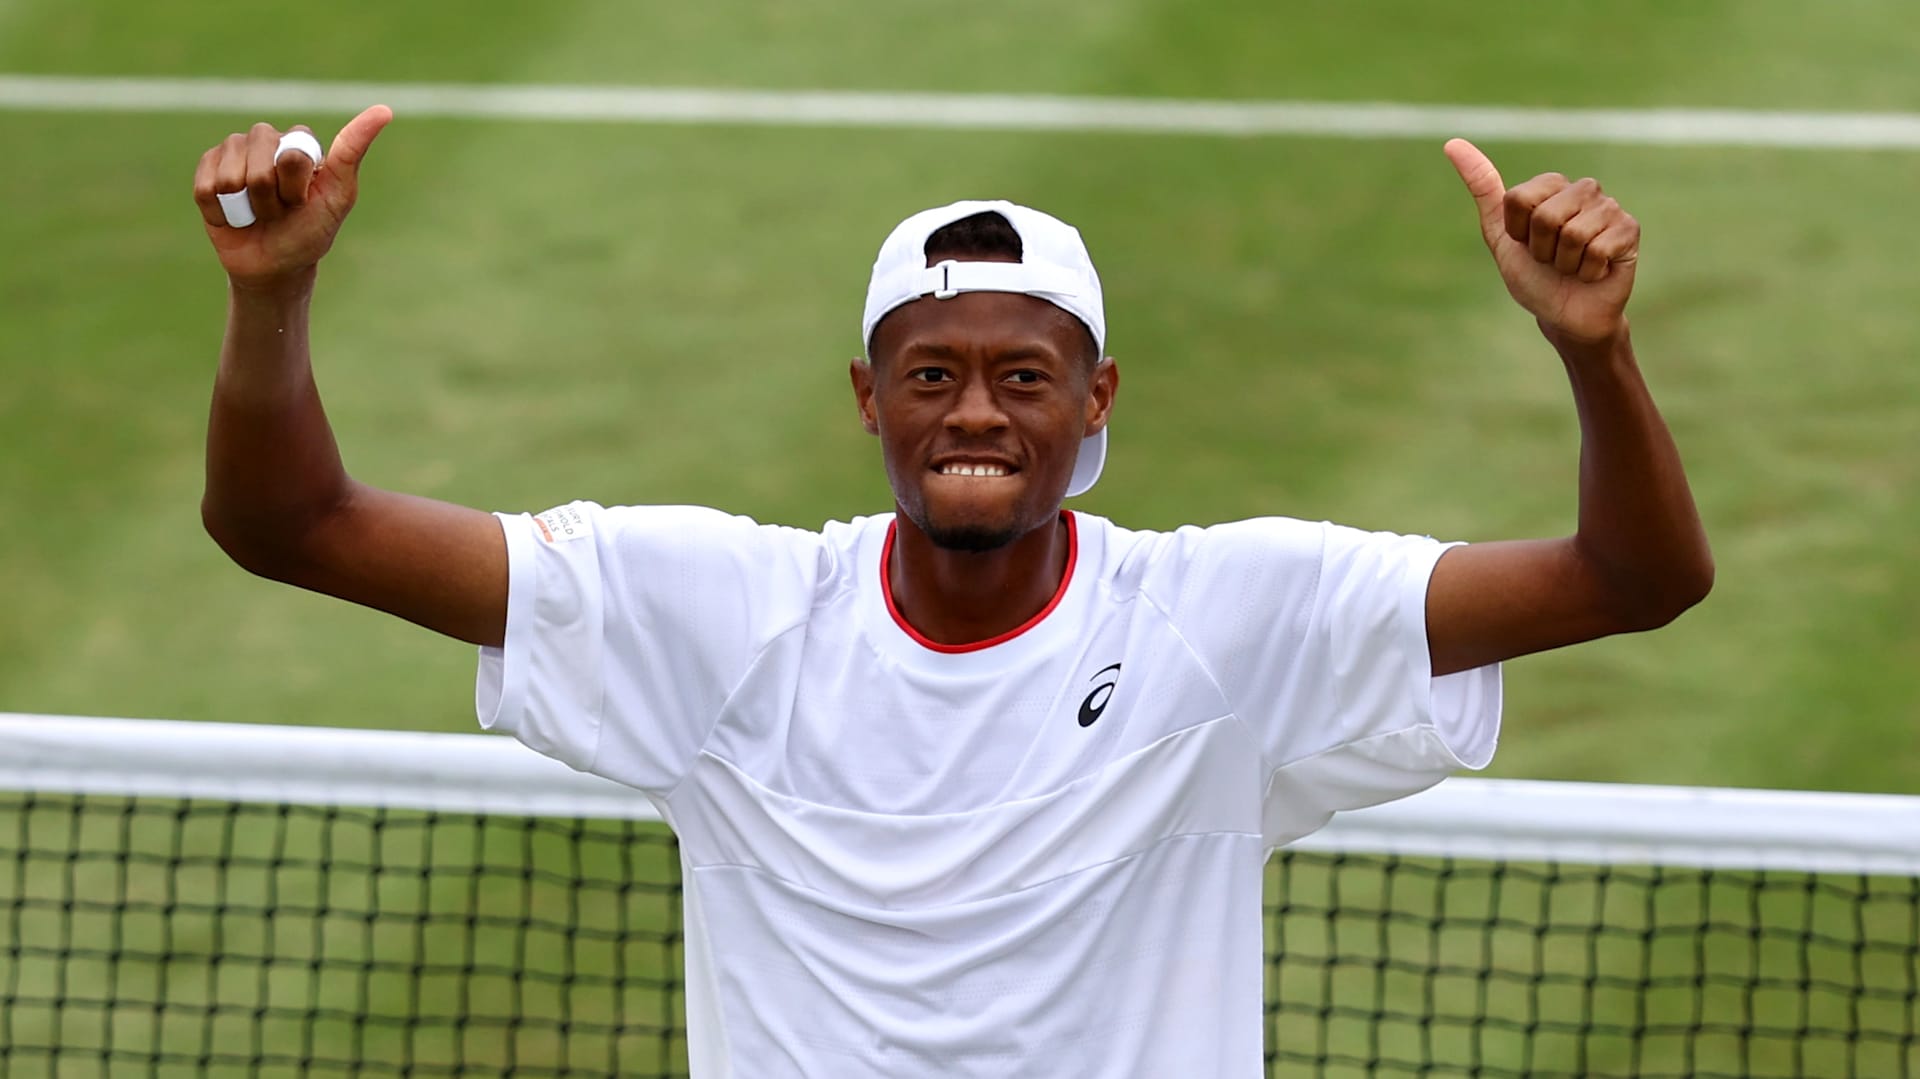 Chris Eubanks The remarkable journey of the 27-year-old American who shocked the tennis world at Wimbledon picture